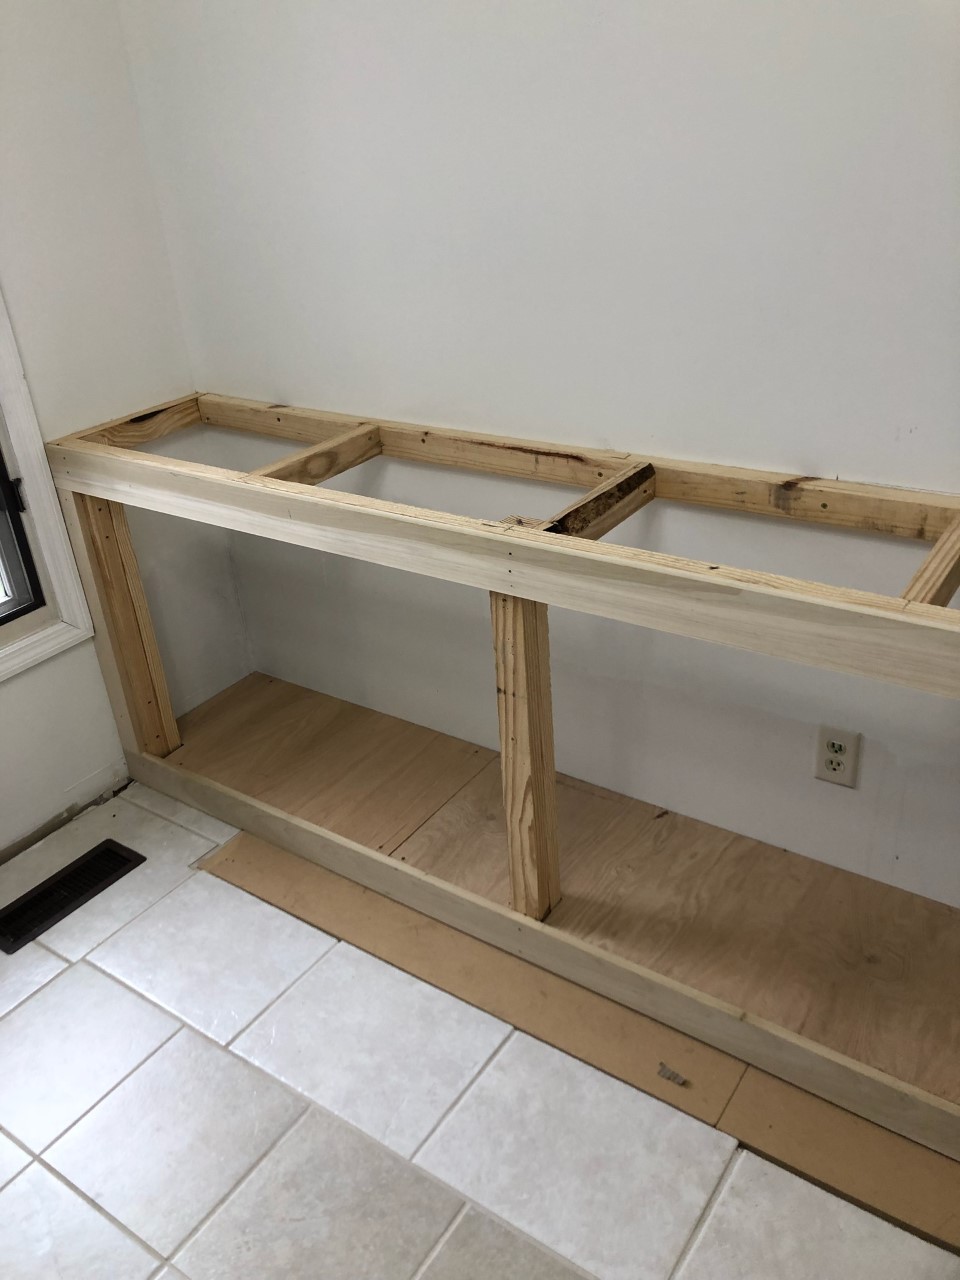 Diy Kitchen Cabinets For Under 200 A, How To Build Own Kitchen Cabinets